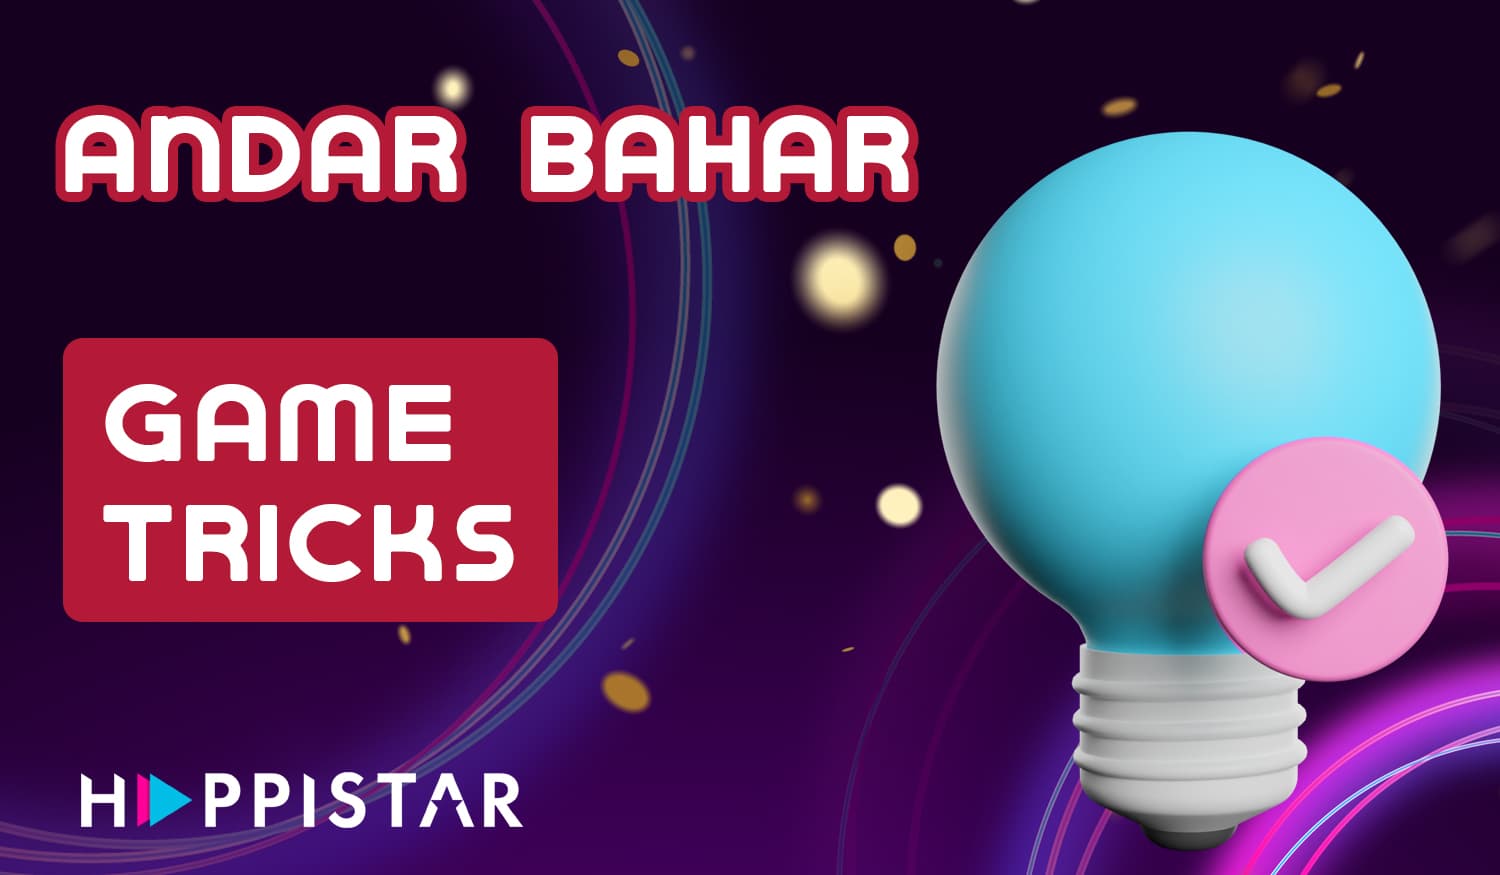 Useful tips and winning strategies for playing Andar Bahar on Happistar